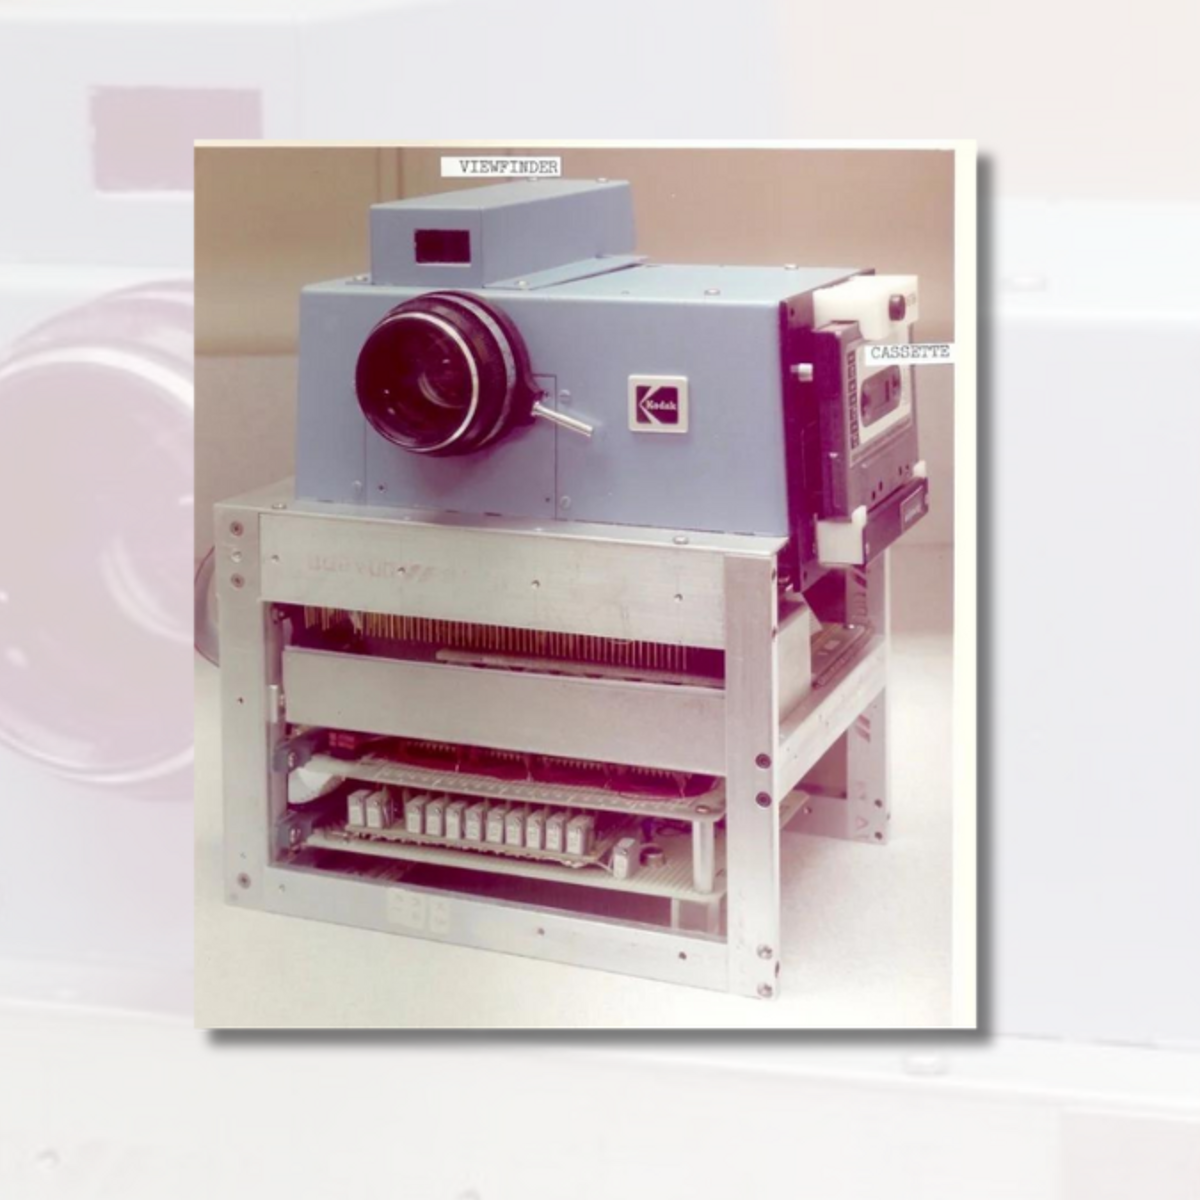 The history of Kodak: Pioneer of film and digital photography